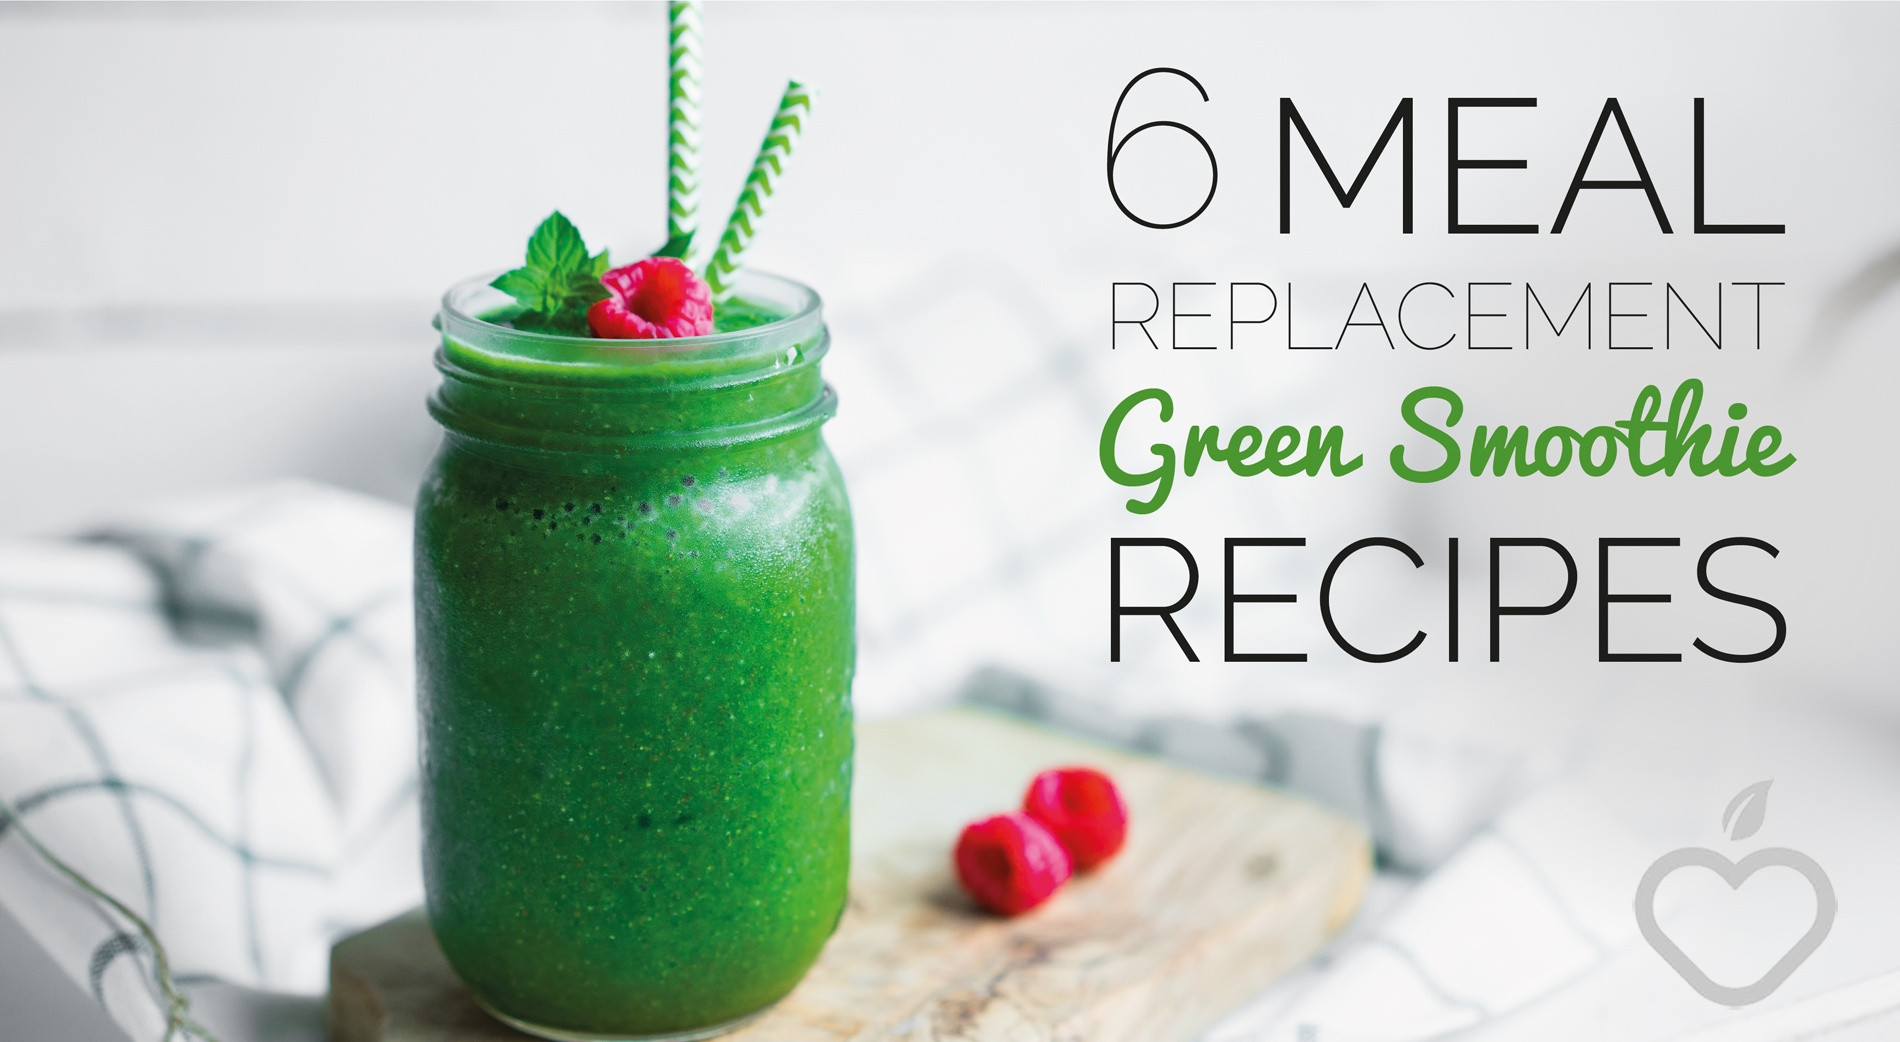 Healthy Meal Replacement Smoothie Recipes
 6 Meal Replacement Green Smoothie Recipes No 4 Is Awesome